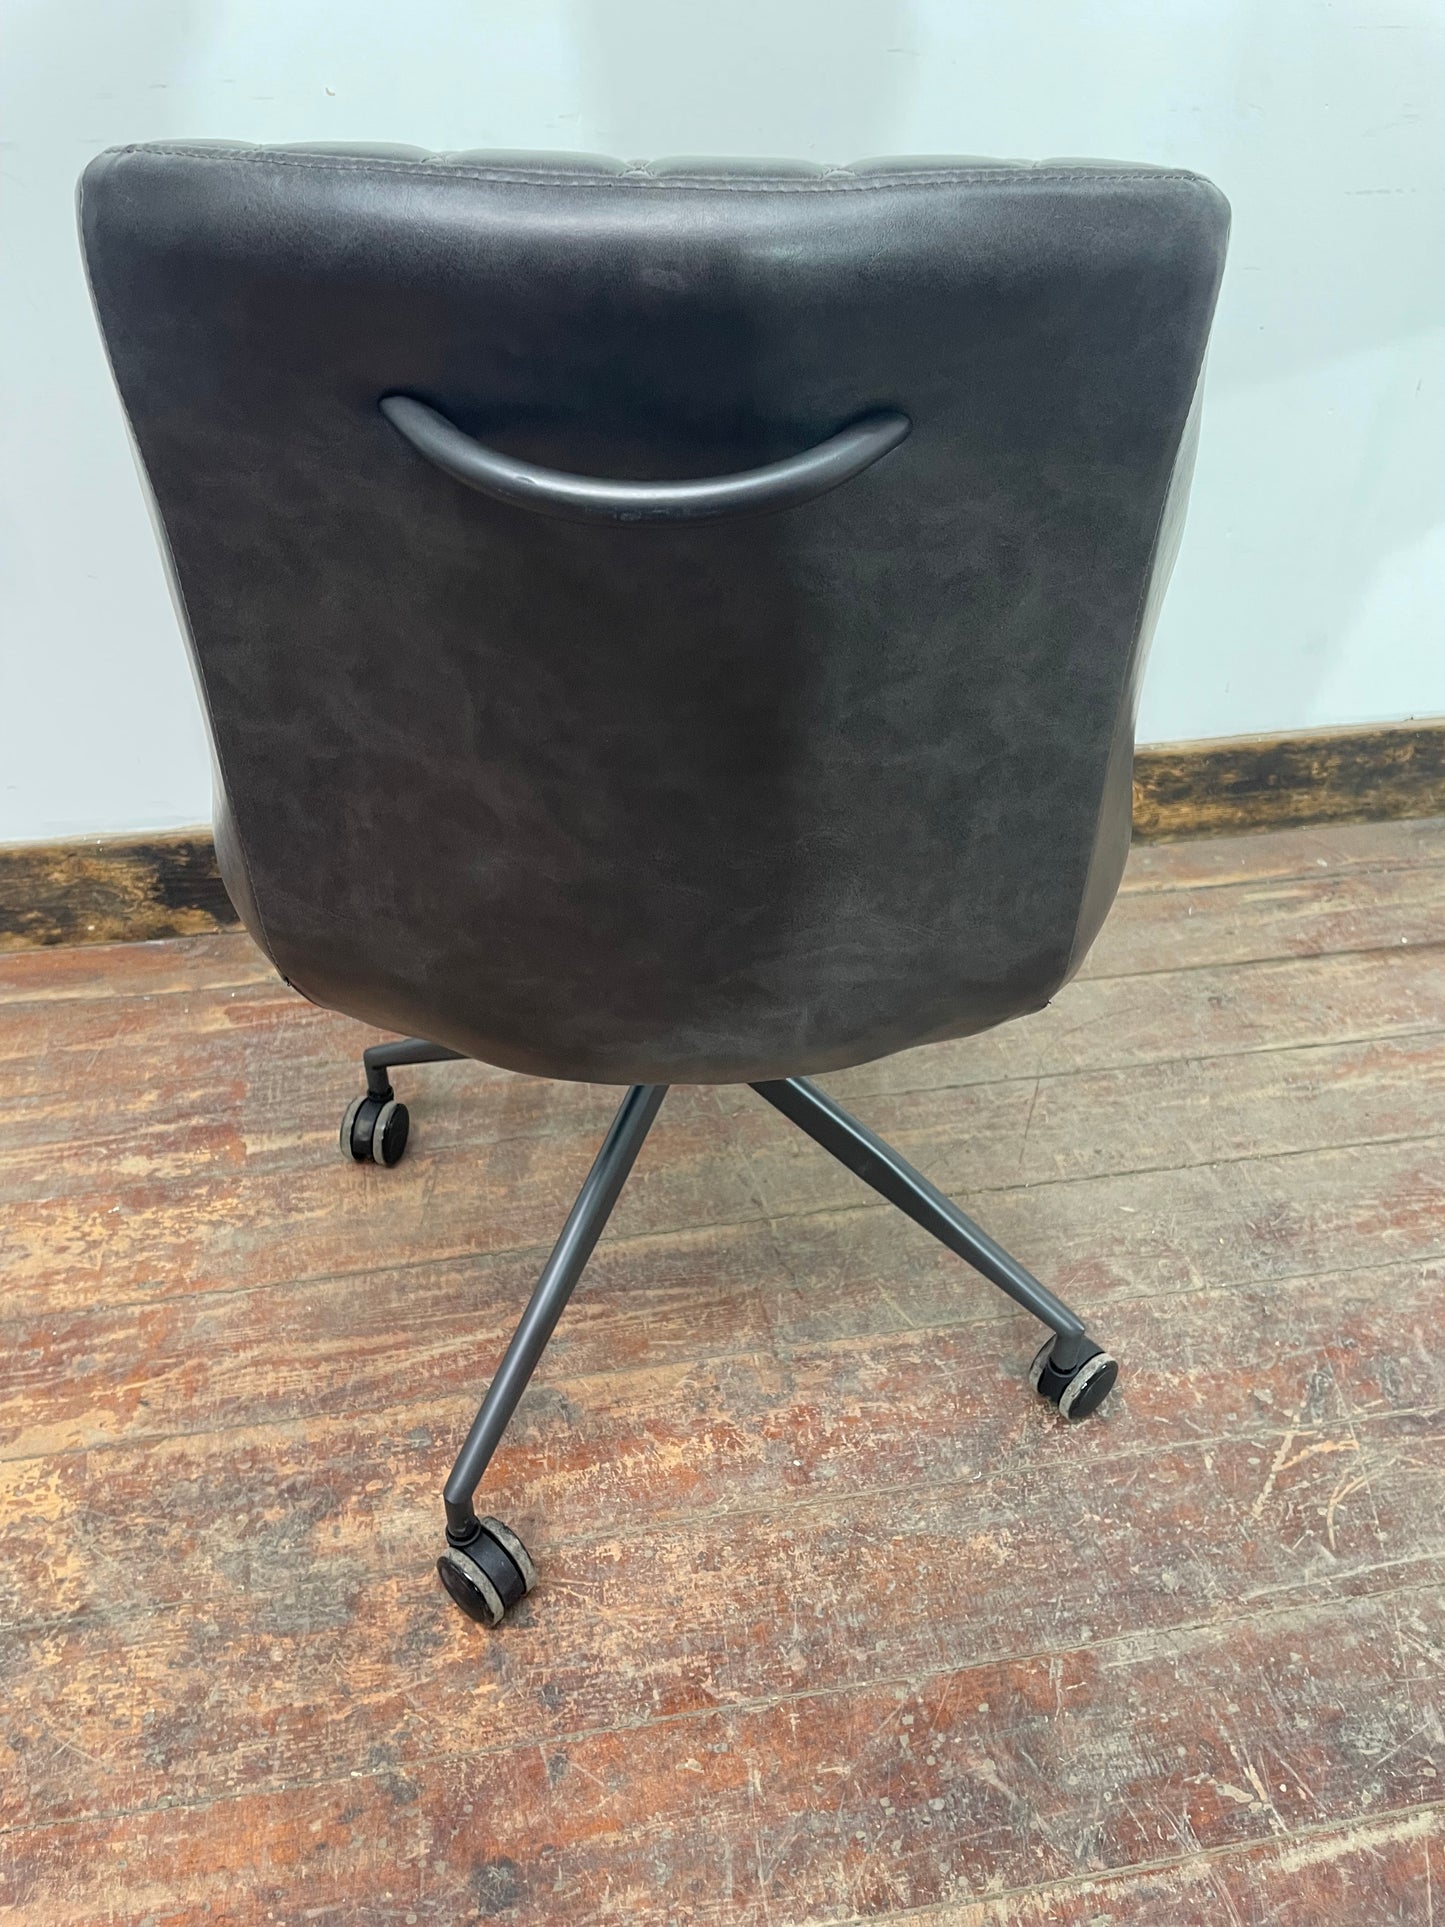 Vegan leather office chair